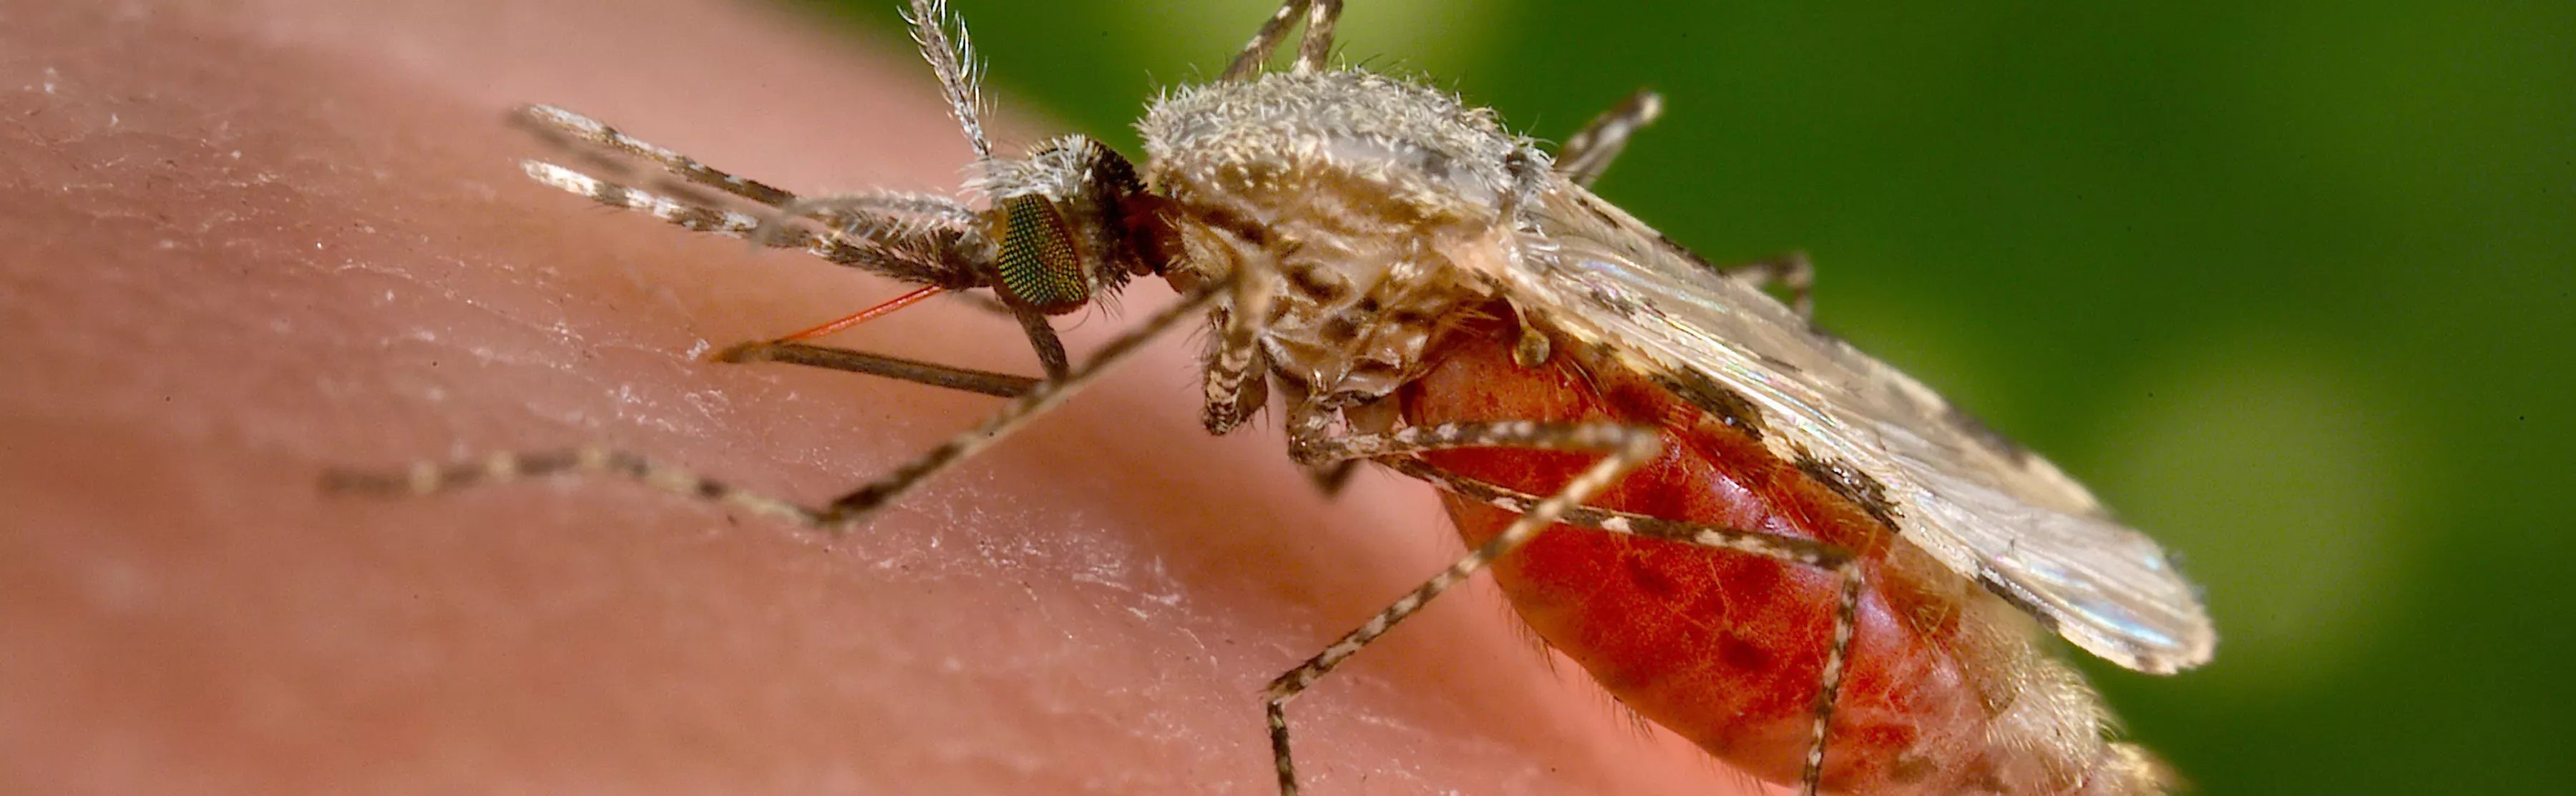 Anopheles stephensi mosquito close up on skin taking a blood meal